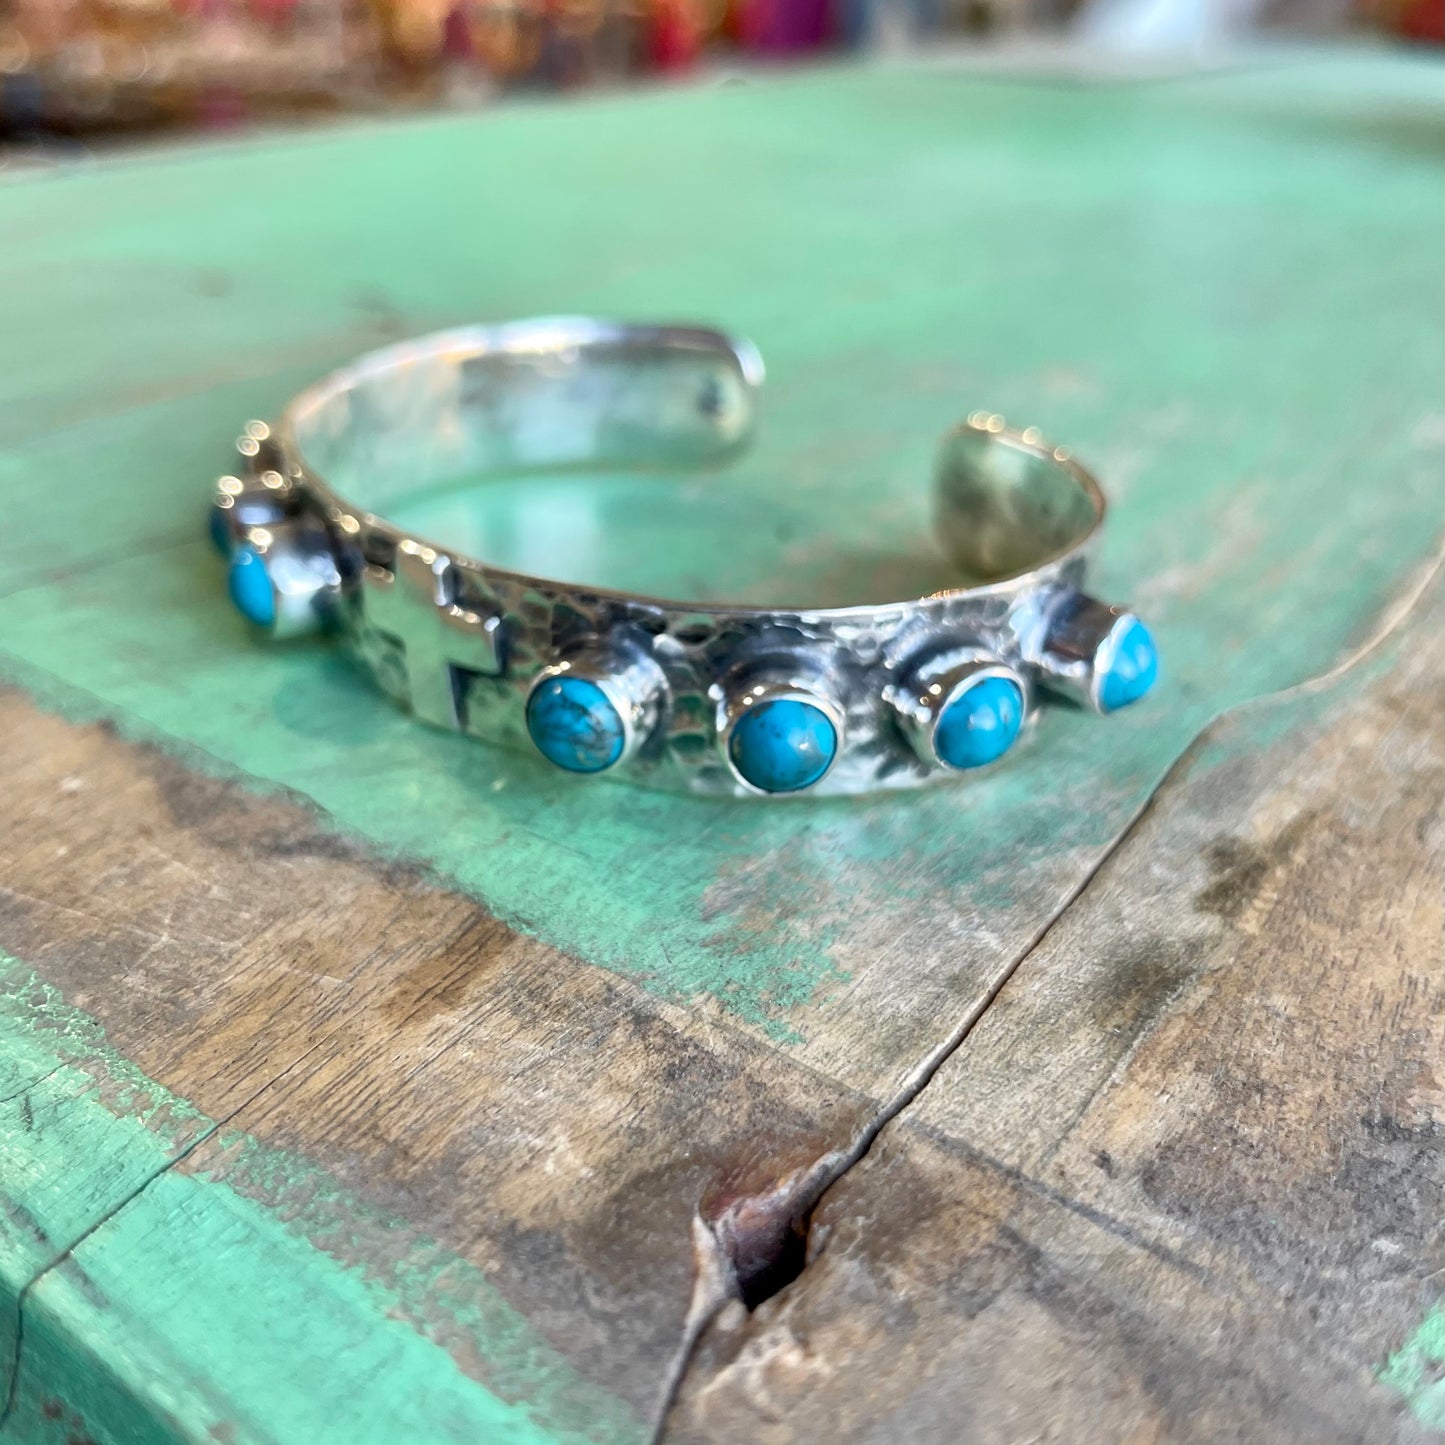 Turquoise Sterling Silver Cuff